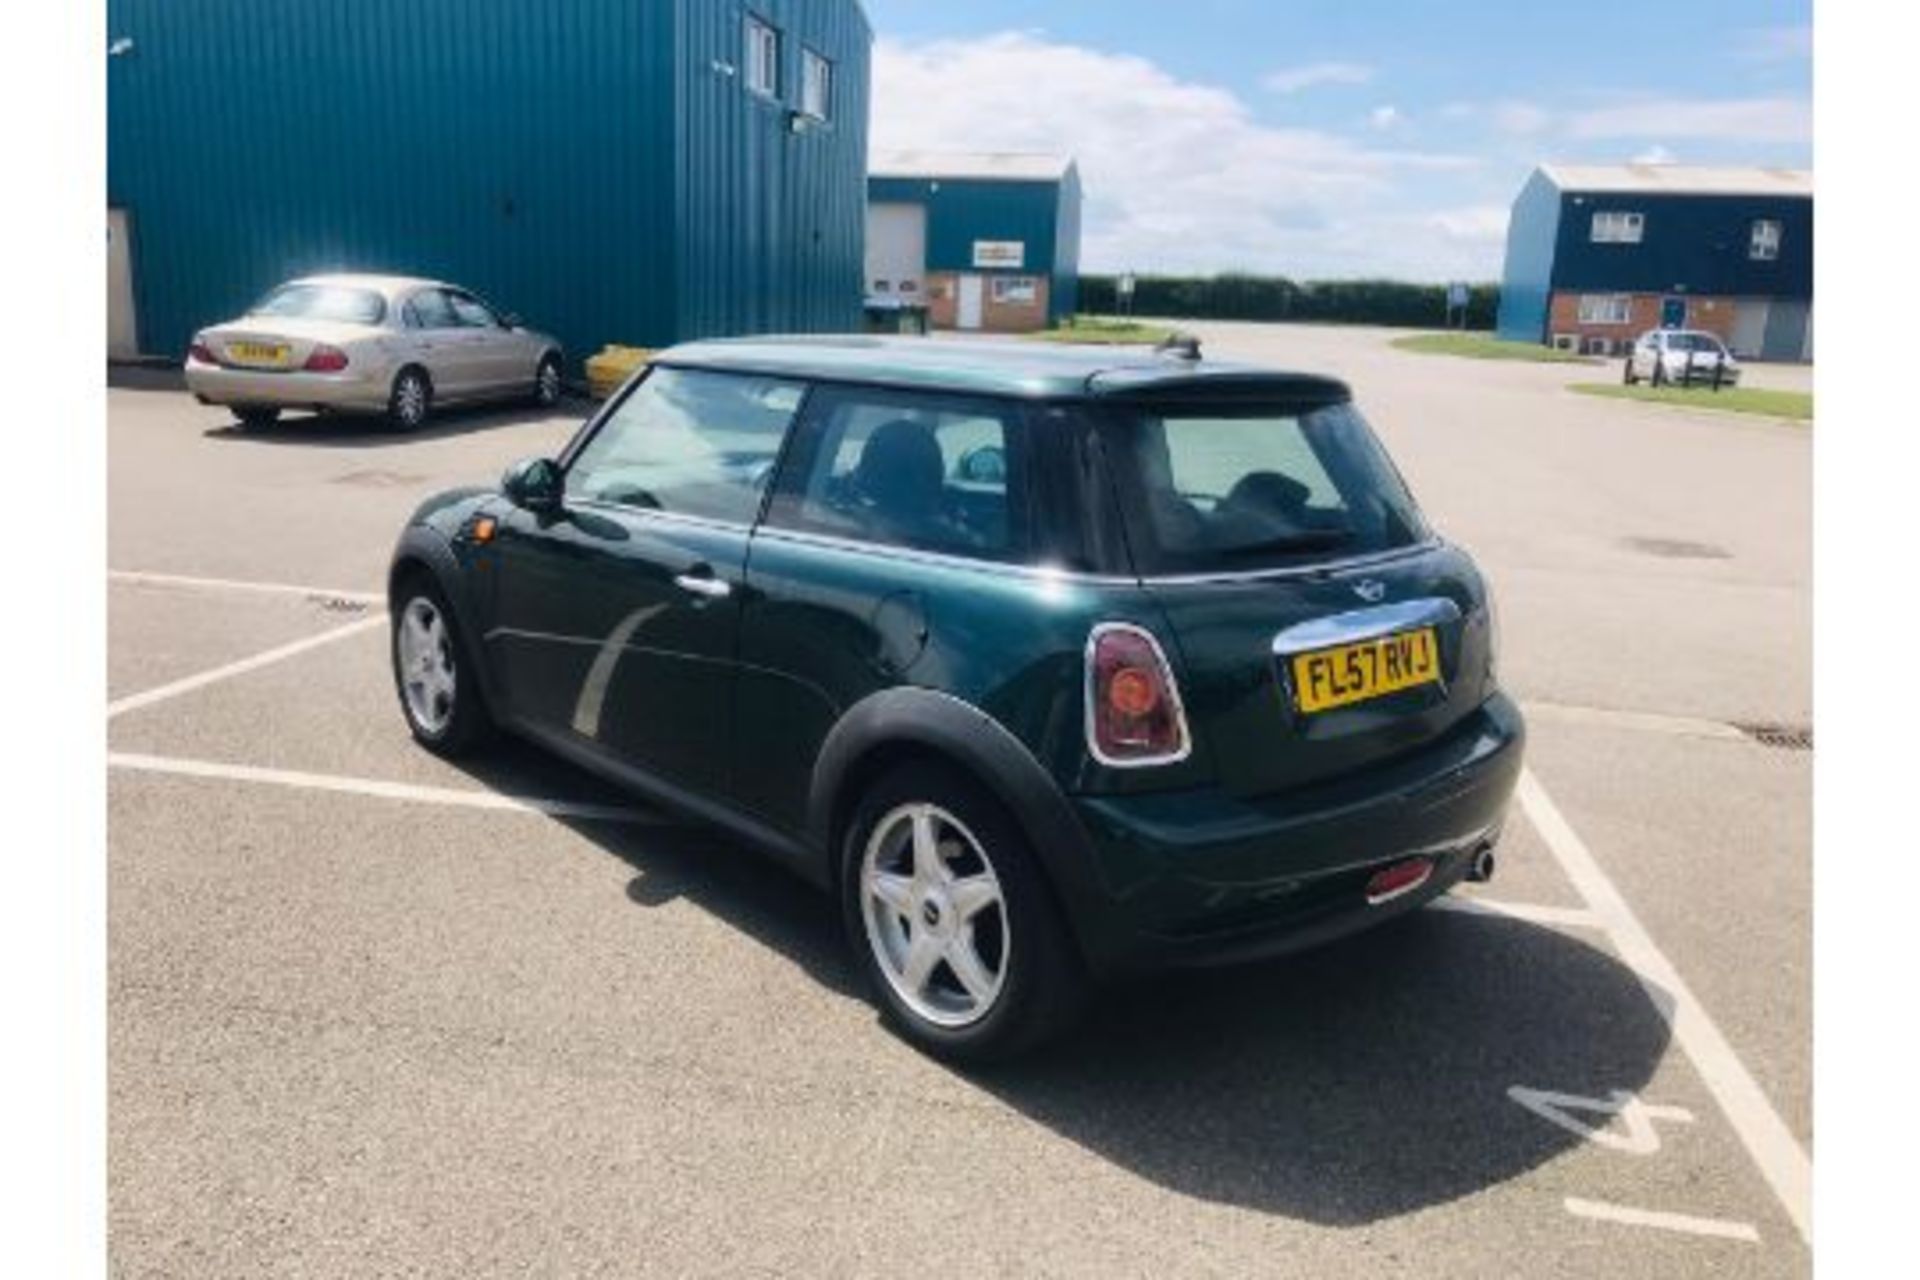 (RESERVE MET) Mini Cooper 1.6 D Hatchback - 2008 Model - Full Leather - Air Con - Heated Screen - - Image 2 of 27